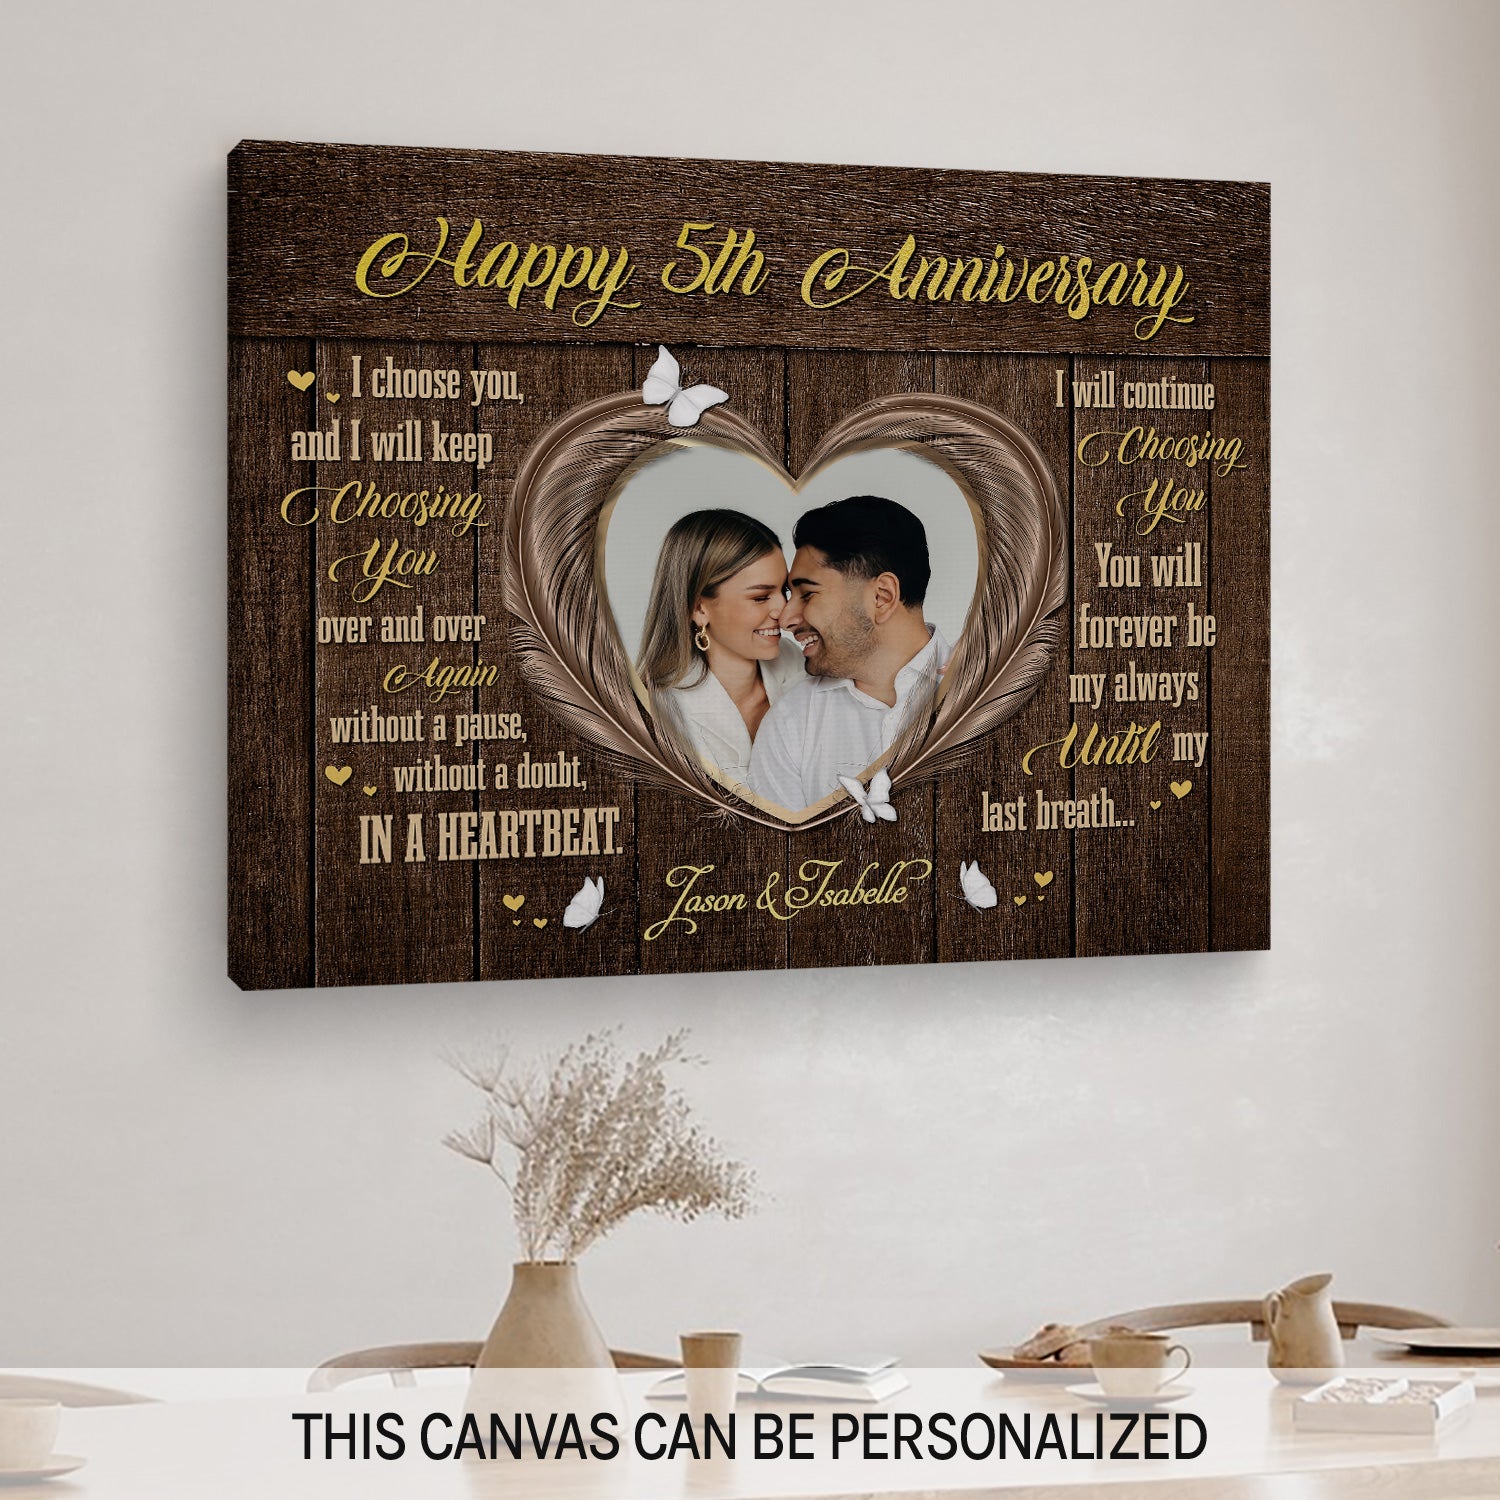 Happy 5th Anniversary - Personalized 5 Year Anniversary gift For Him or Her - Custom Canvas Print - MyMindfulGifts